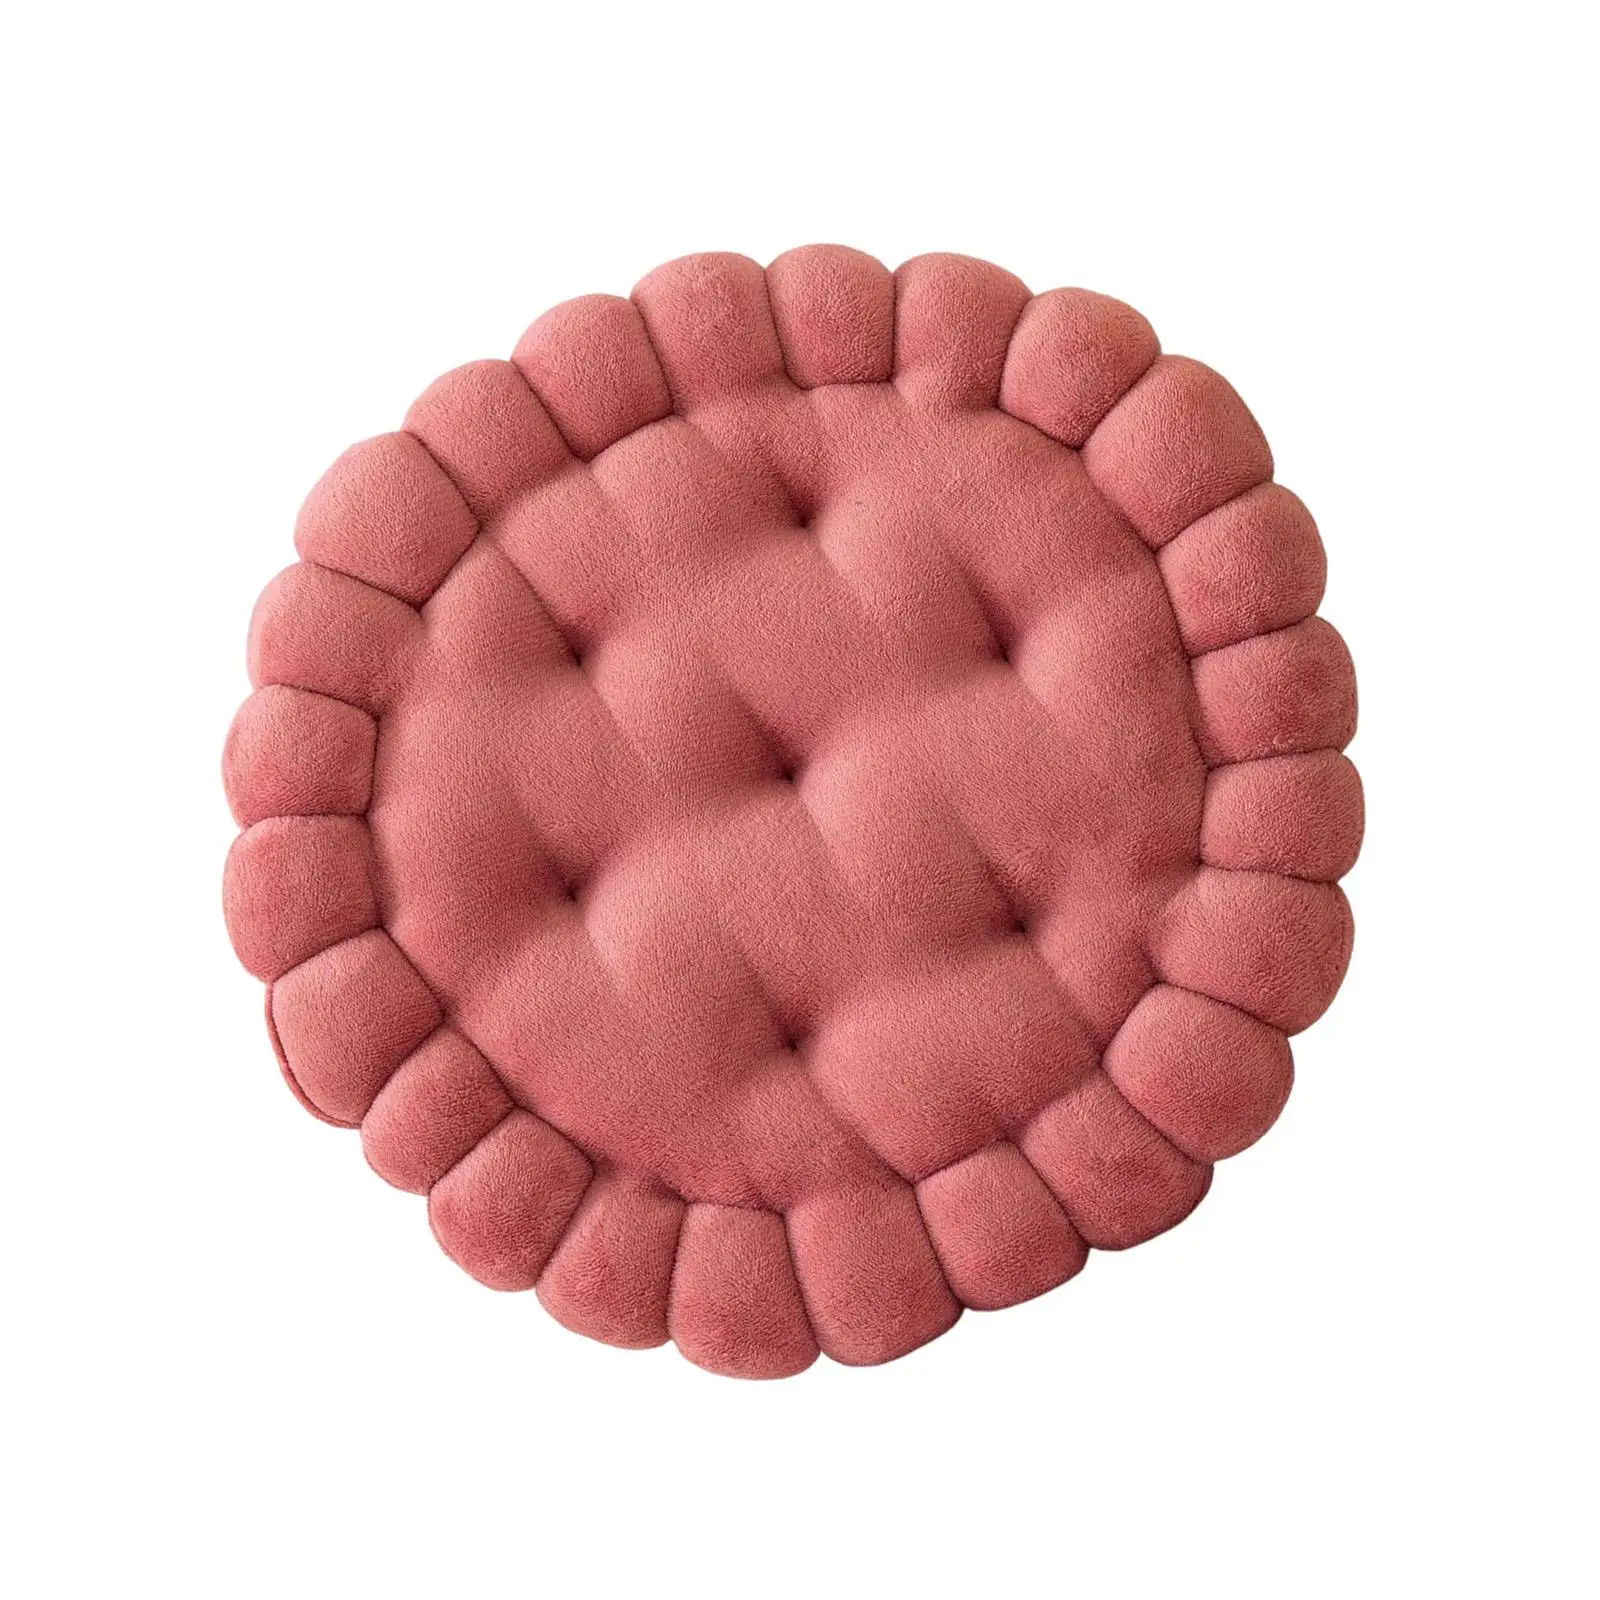 Sofa Seat Cushion Mat Round Biscuit Shape Padded Cotton Decoration Furniture Cute Chair Pad for Living Room Balcony Yoga